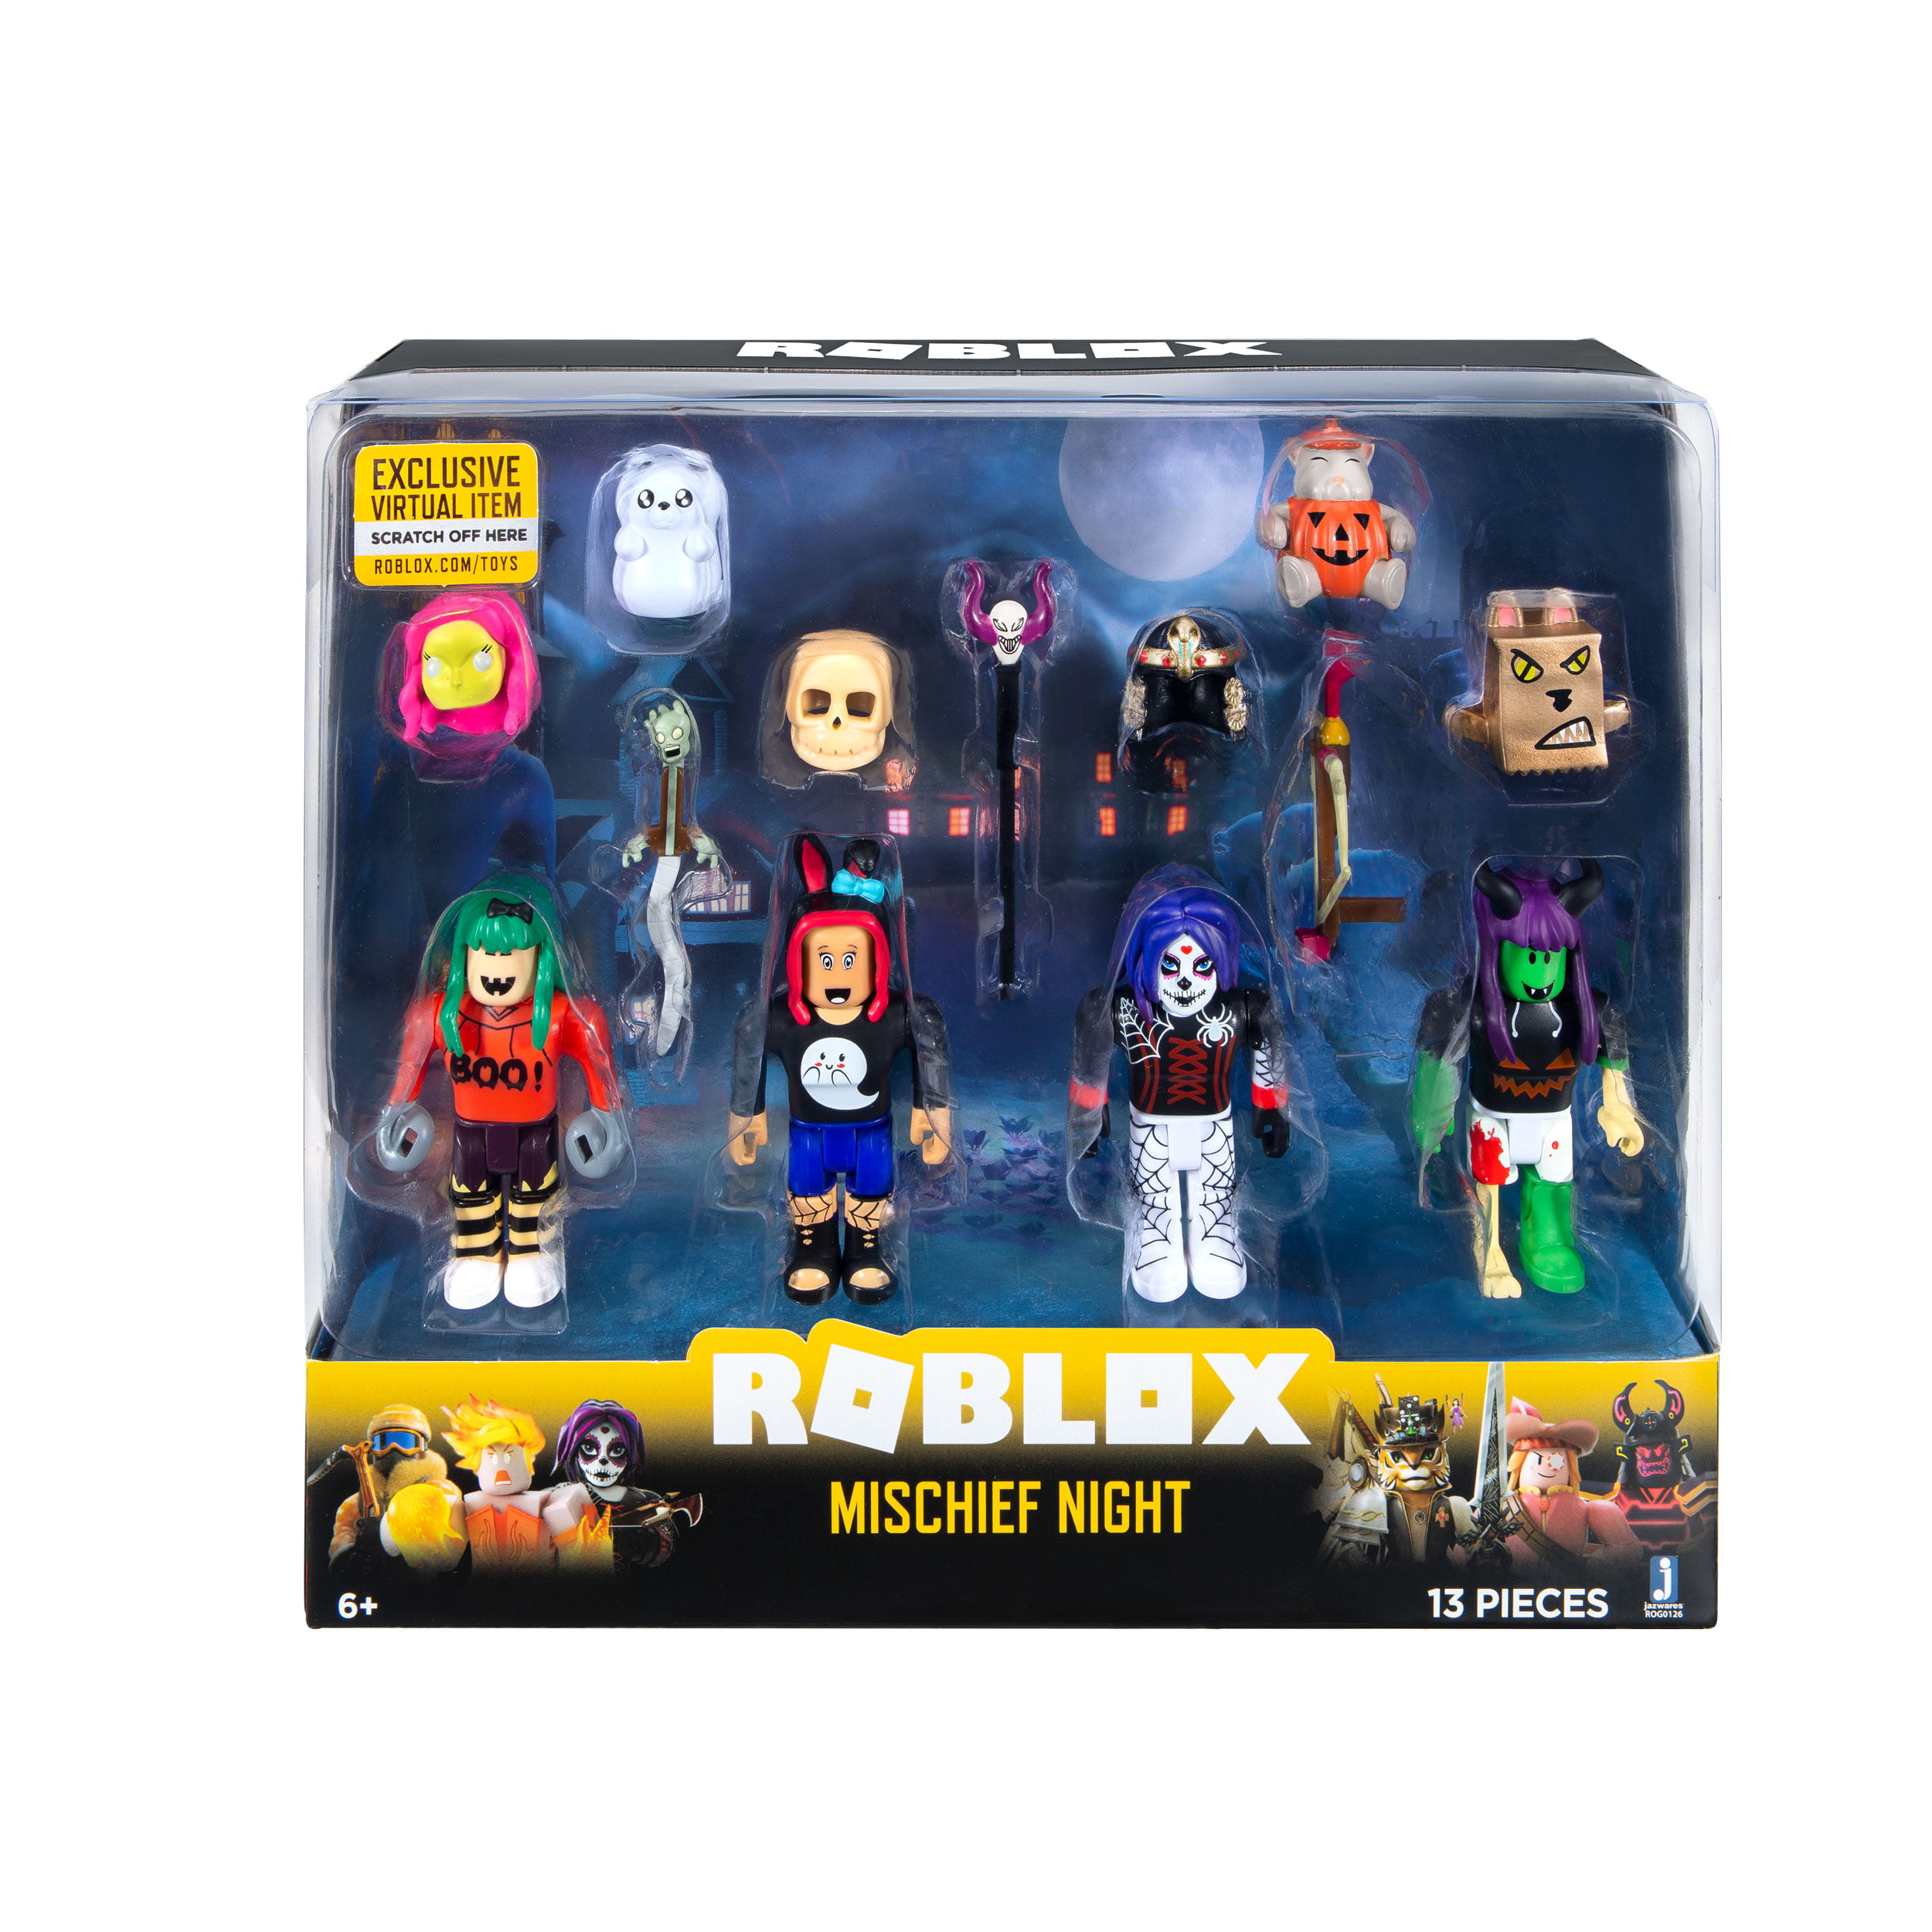 Roblox Celebrity Collection Mischief Night Four Figure Pack Includes Exclusive Virtual Item Walmart Com Walmart Com - 3d printed roblox figure roblox amino